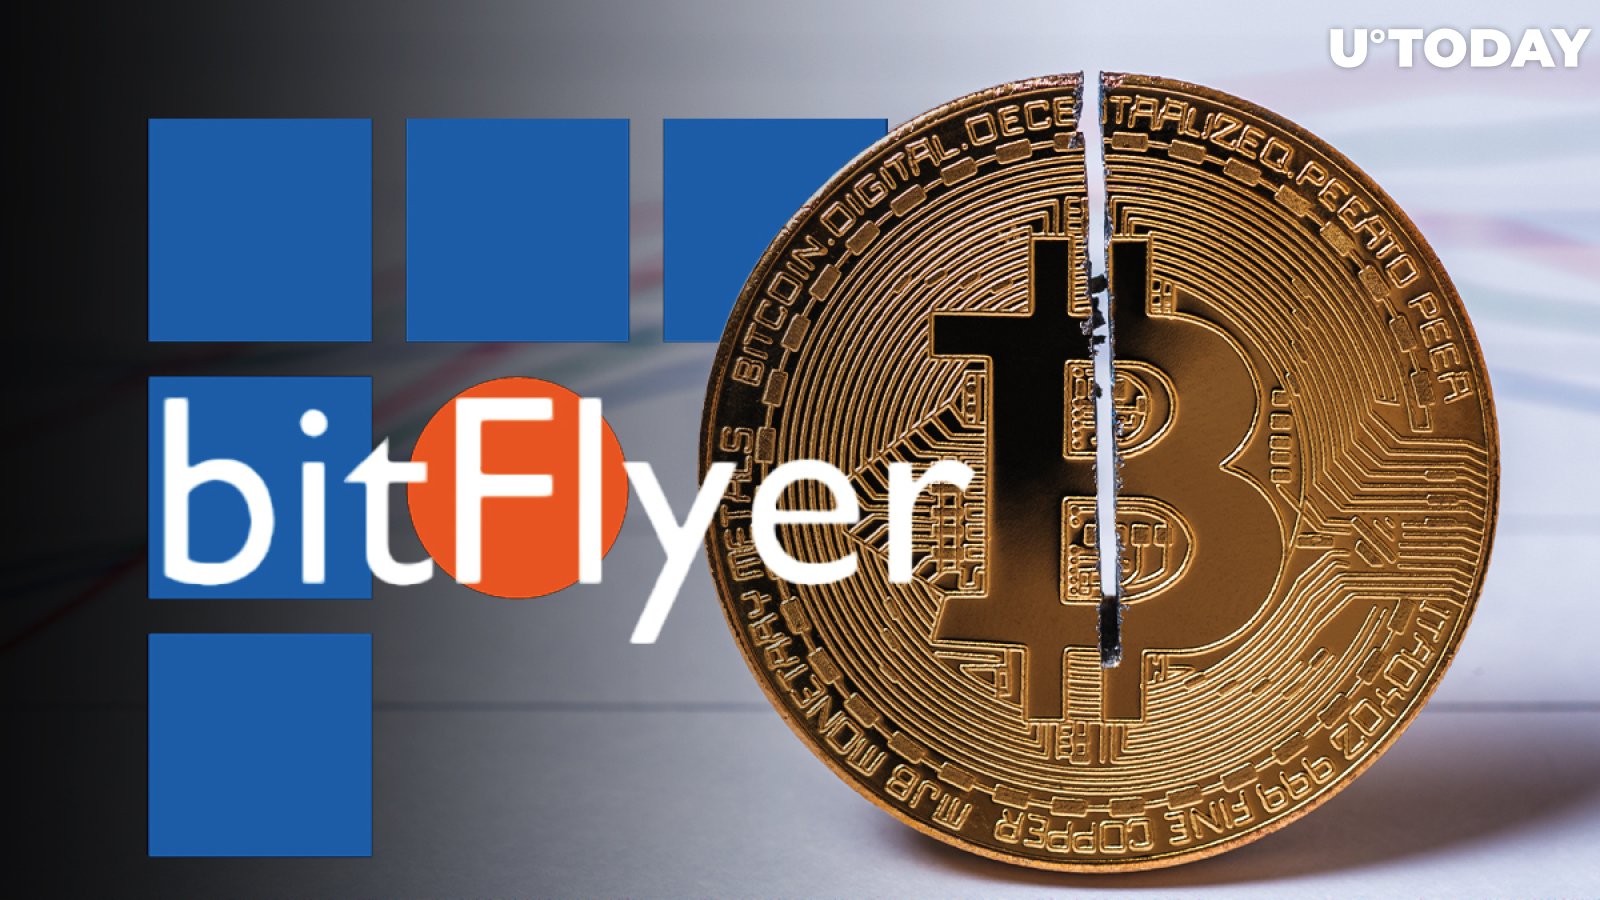 BitFlyer USA Crypto Exchange Announces Instant Deposits and Bitcoin (BTC) Halving Promotion